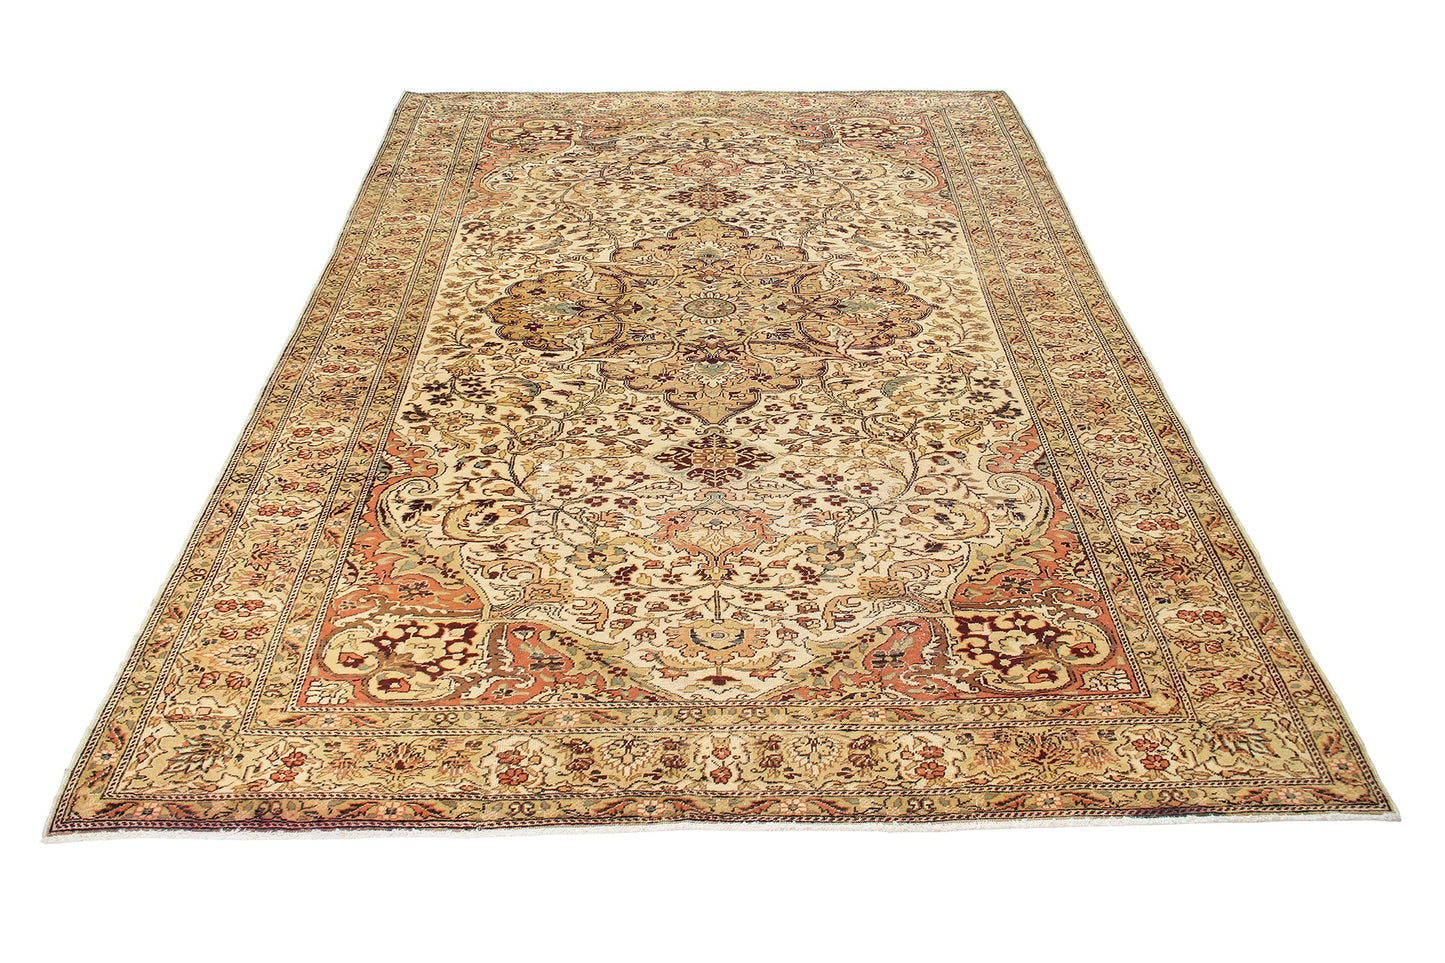 Vintage Turkish Rug With a Traditional Antique Design product image #27556254351530